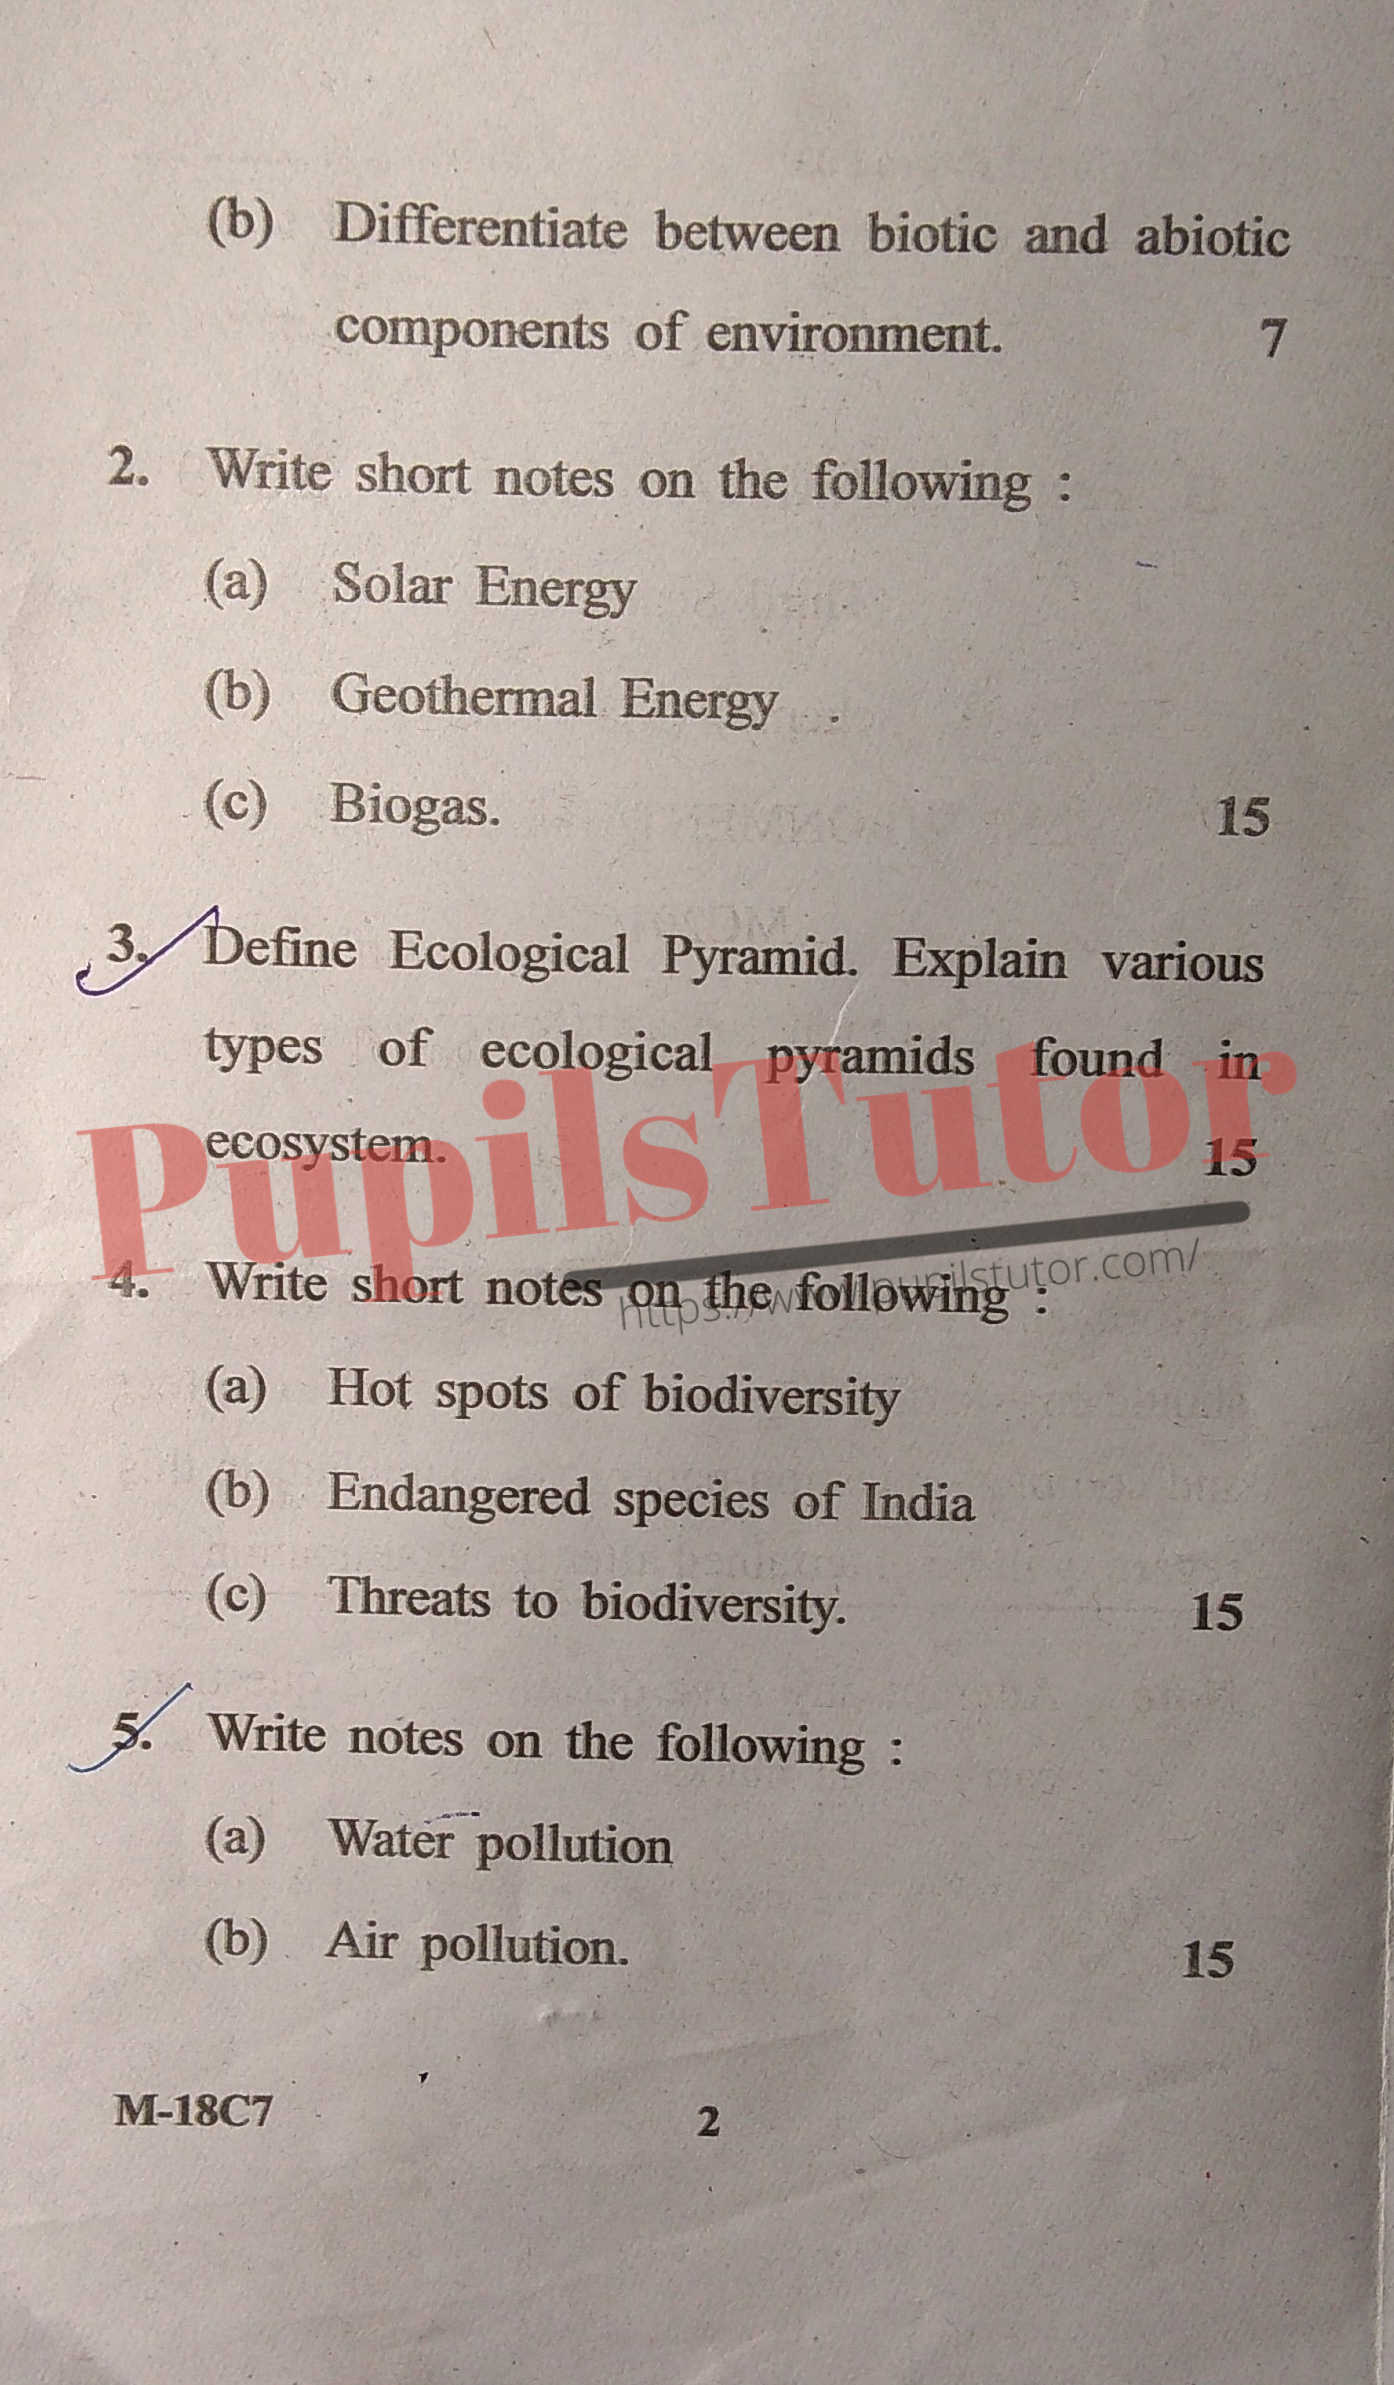 M.D. University B.Tech Environmental Science Third Semester Important Question Answer And Solution - www.pupilstutor.com (Paper Page Number 2)